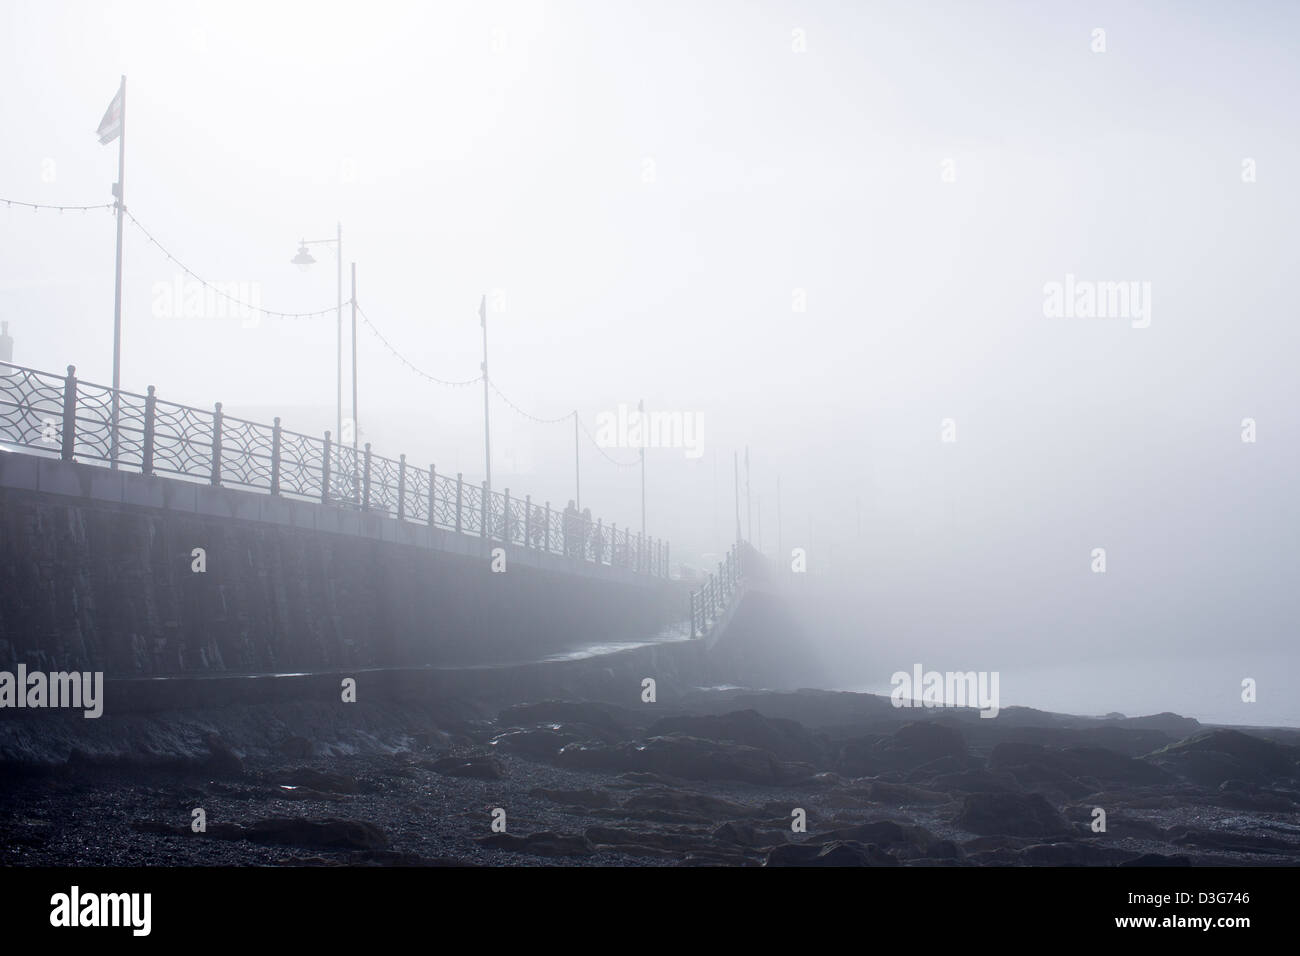 Clevedon seafront in heavy morning fog and mist. Stock Photo